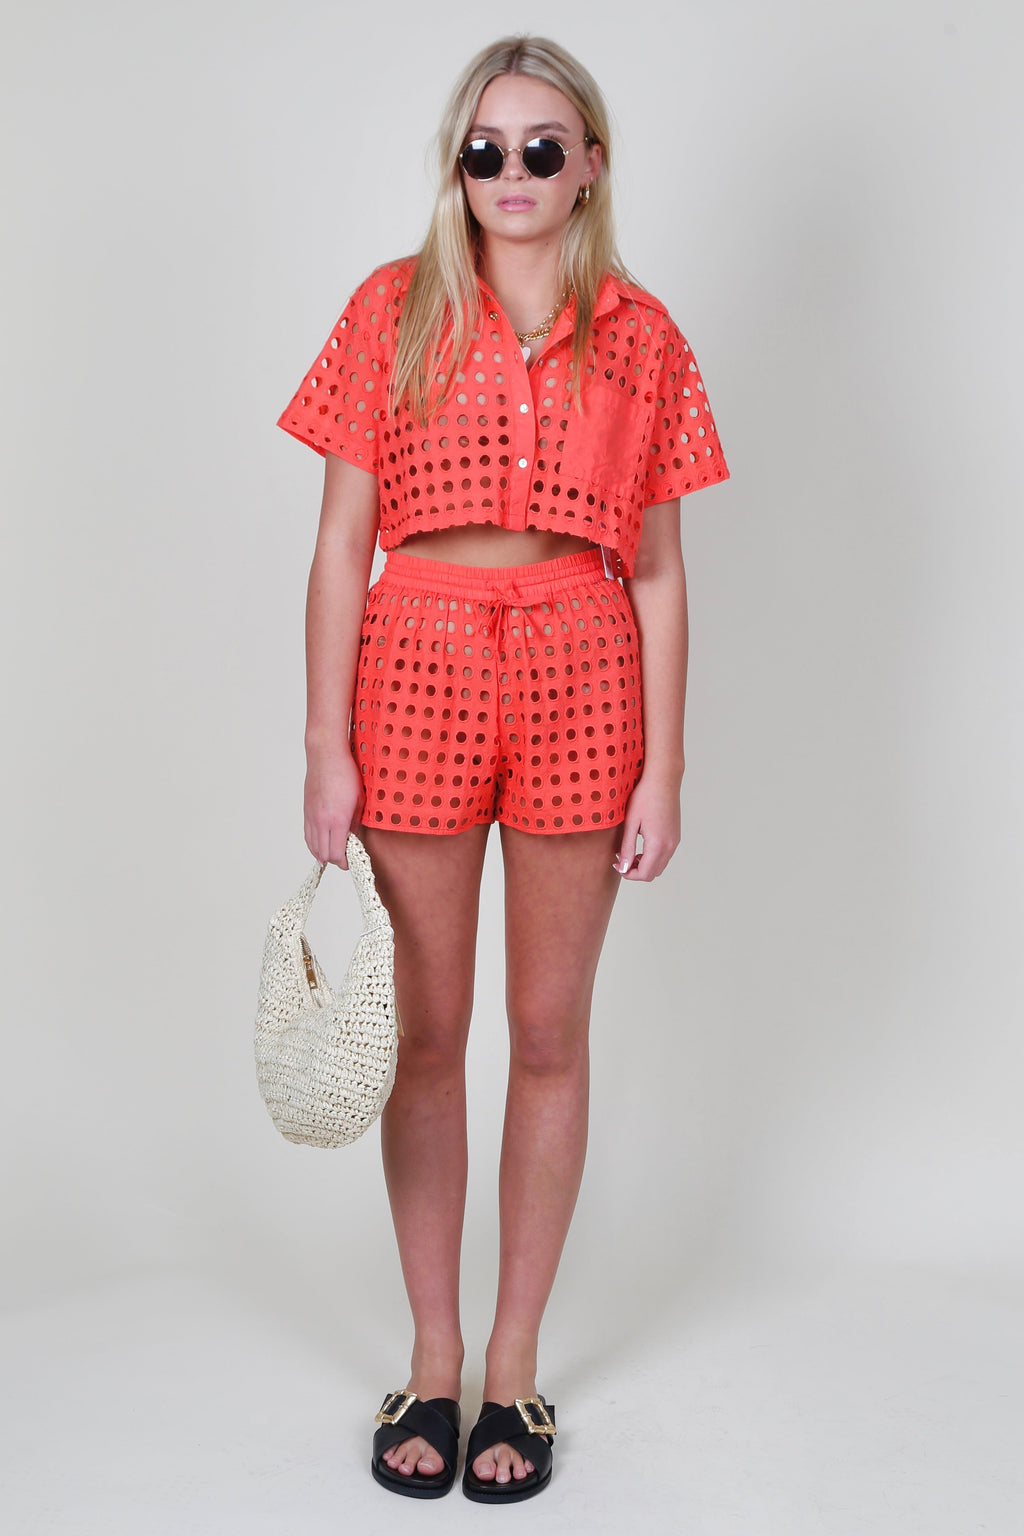 SOLID & STRIPED | The Charlie Shorts - Coral Crush